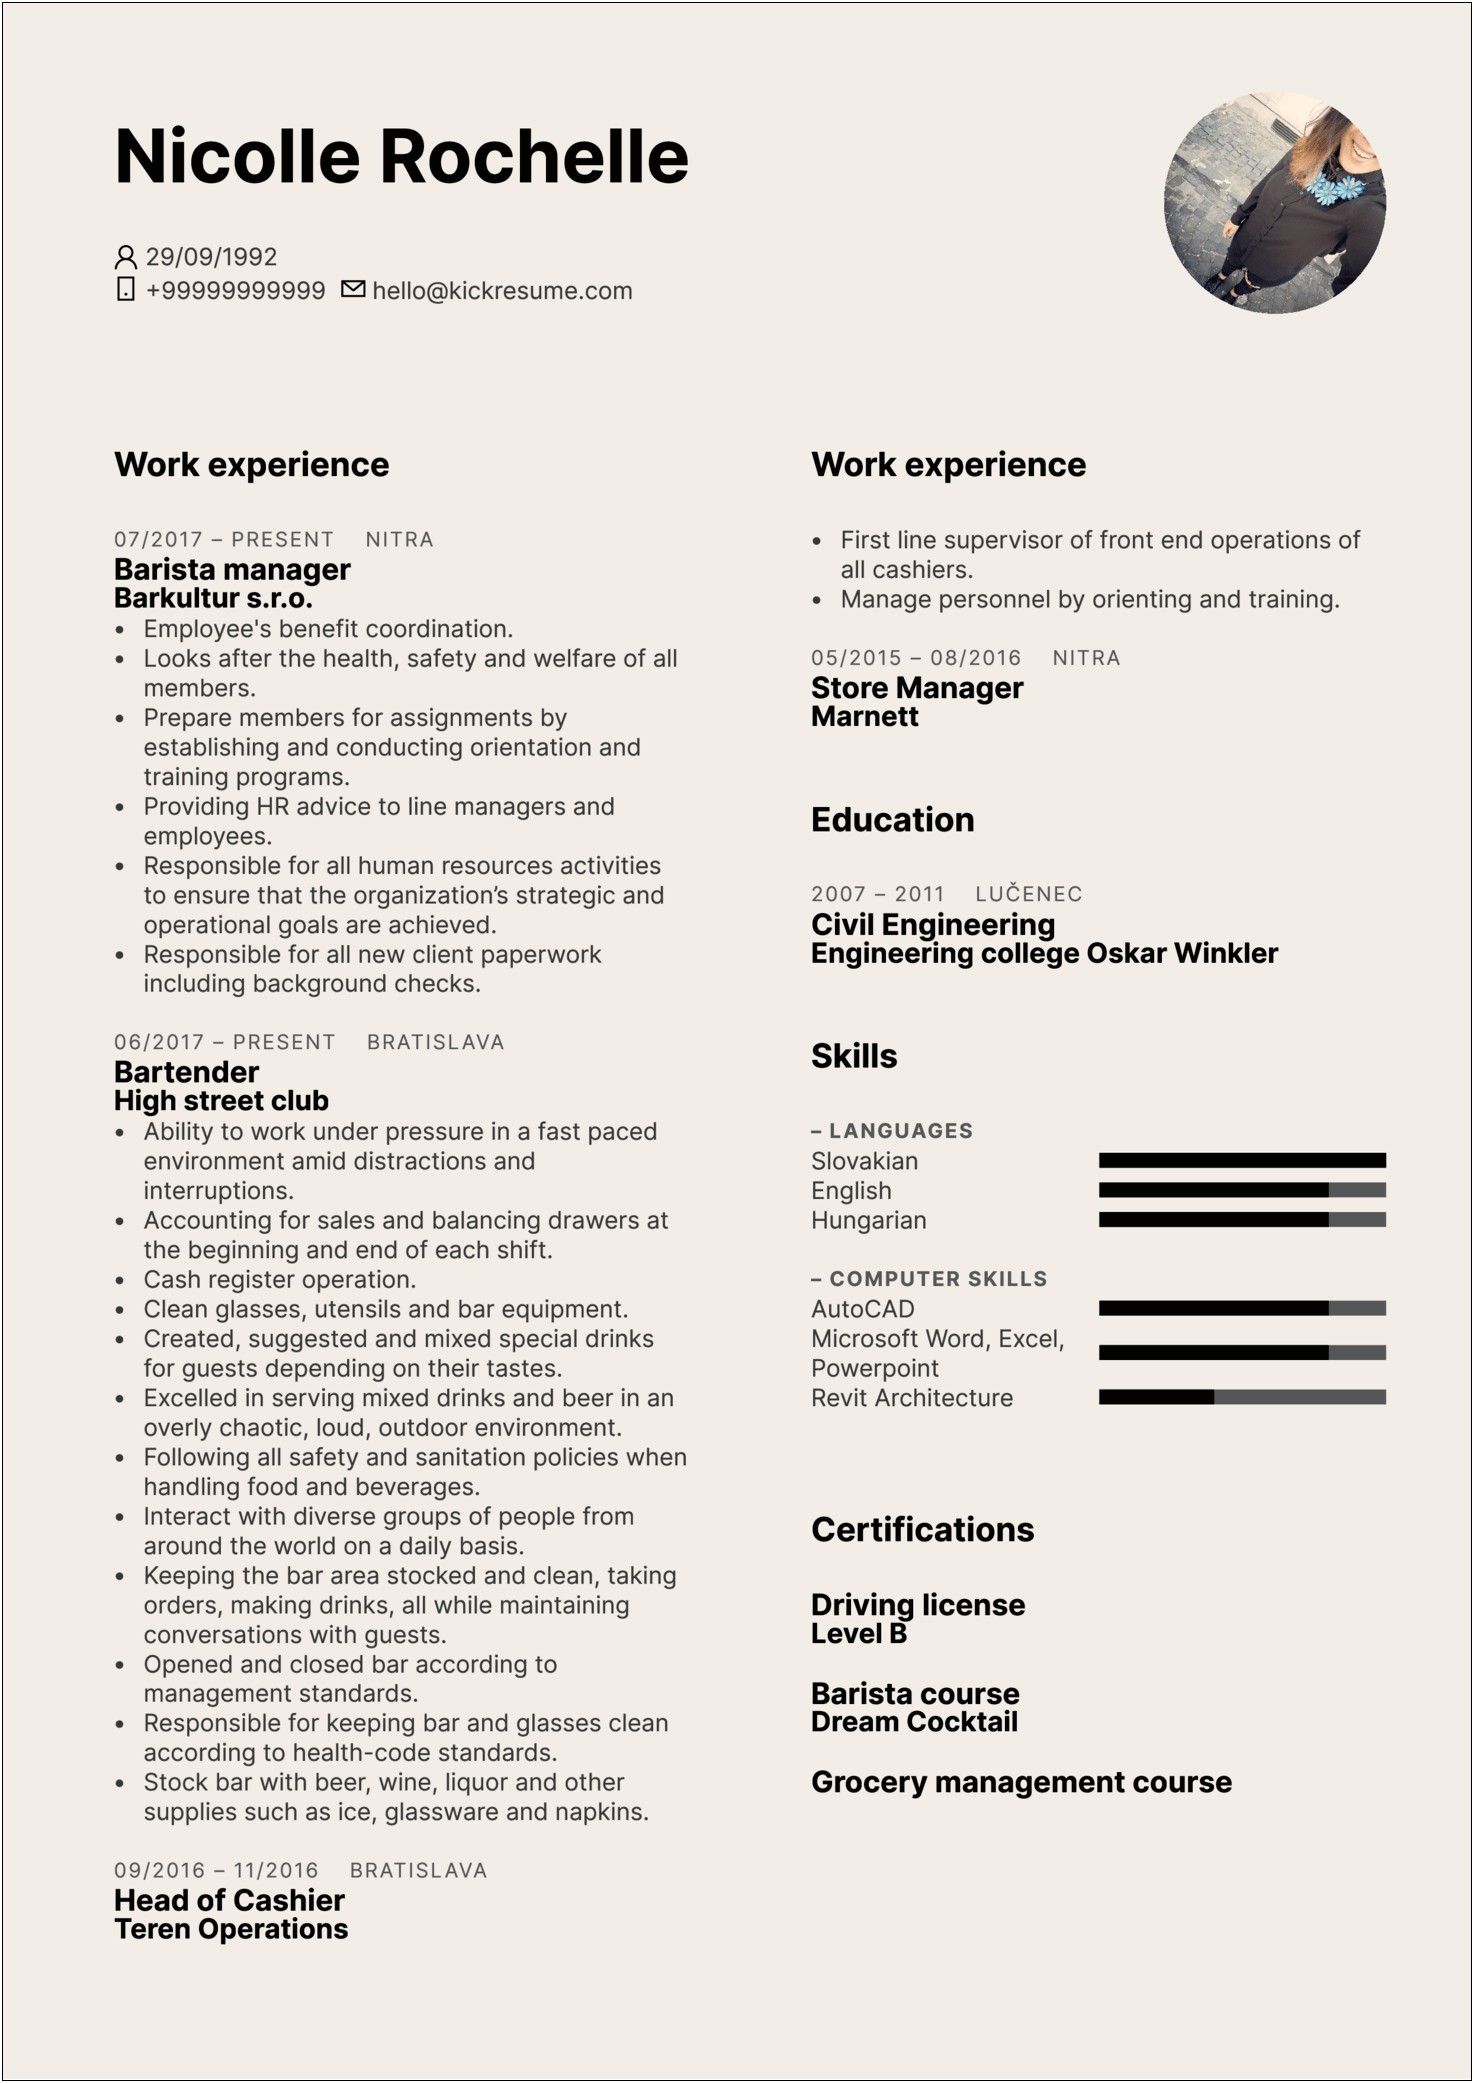 Resume Skills For A Barista